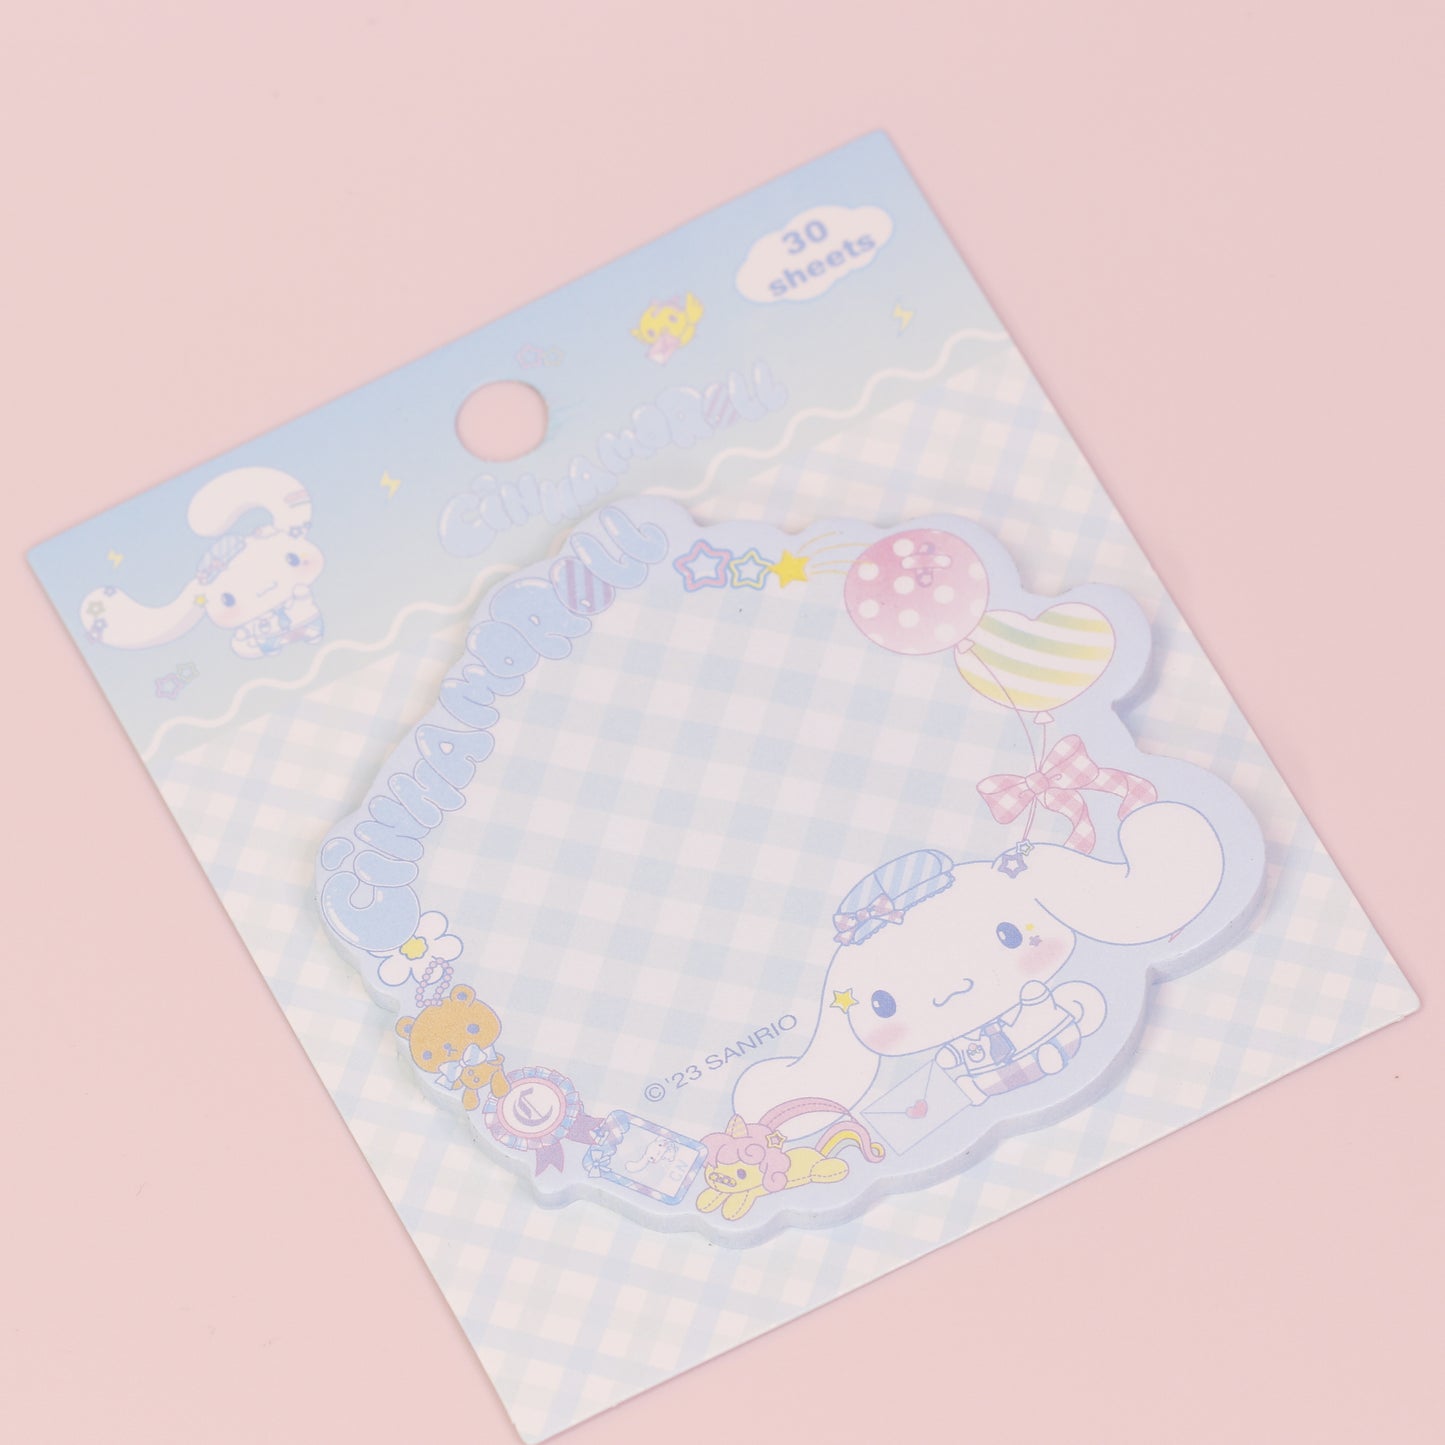 Hazy Dreamy Cinnamoroll Sticky Notes - Adorable Stationery for Memorable Notes